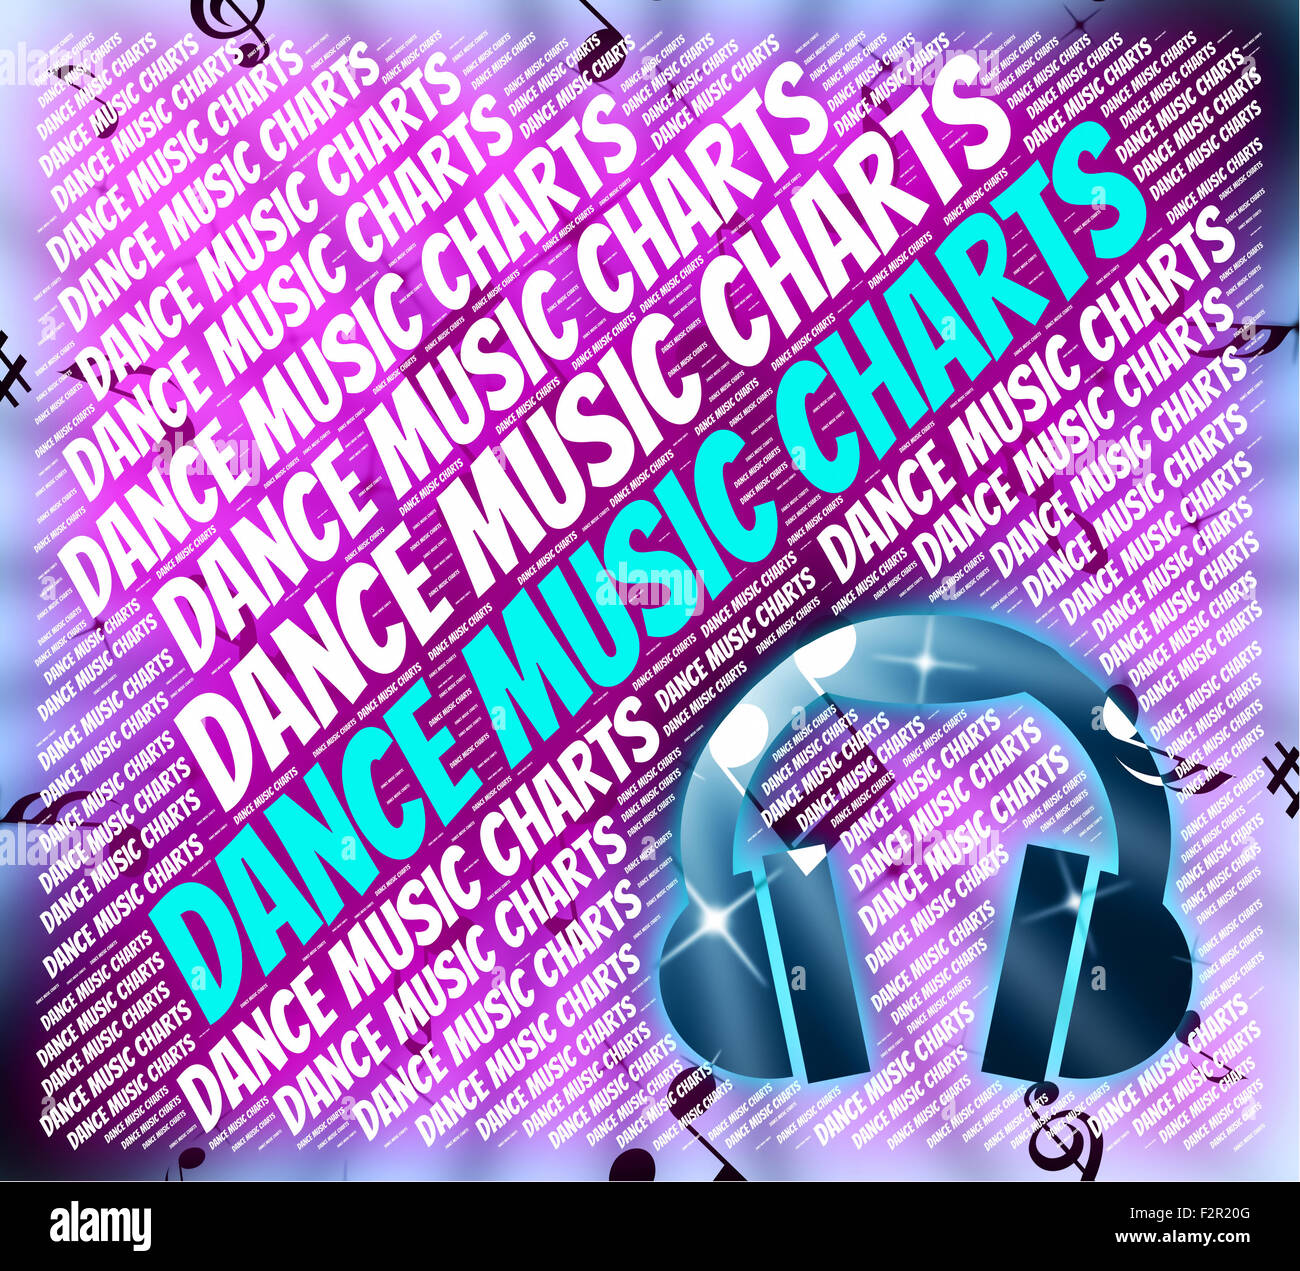 Dance Music Charts Showing Sound Tracks And Dances Stock Photo